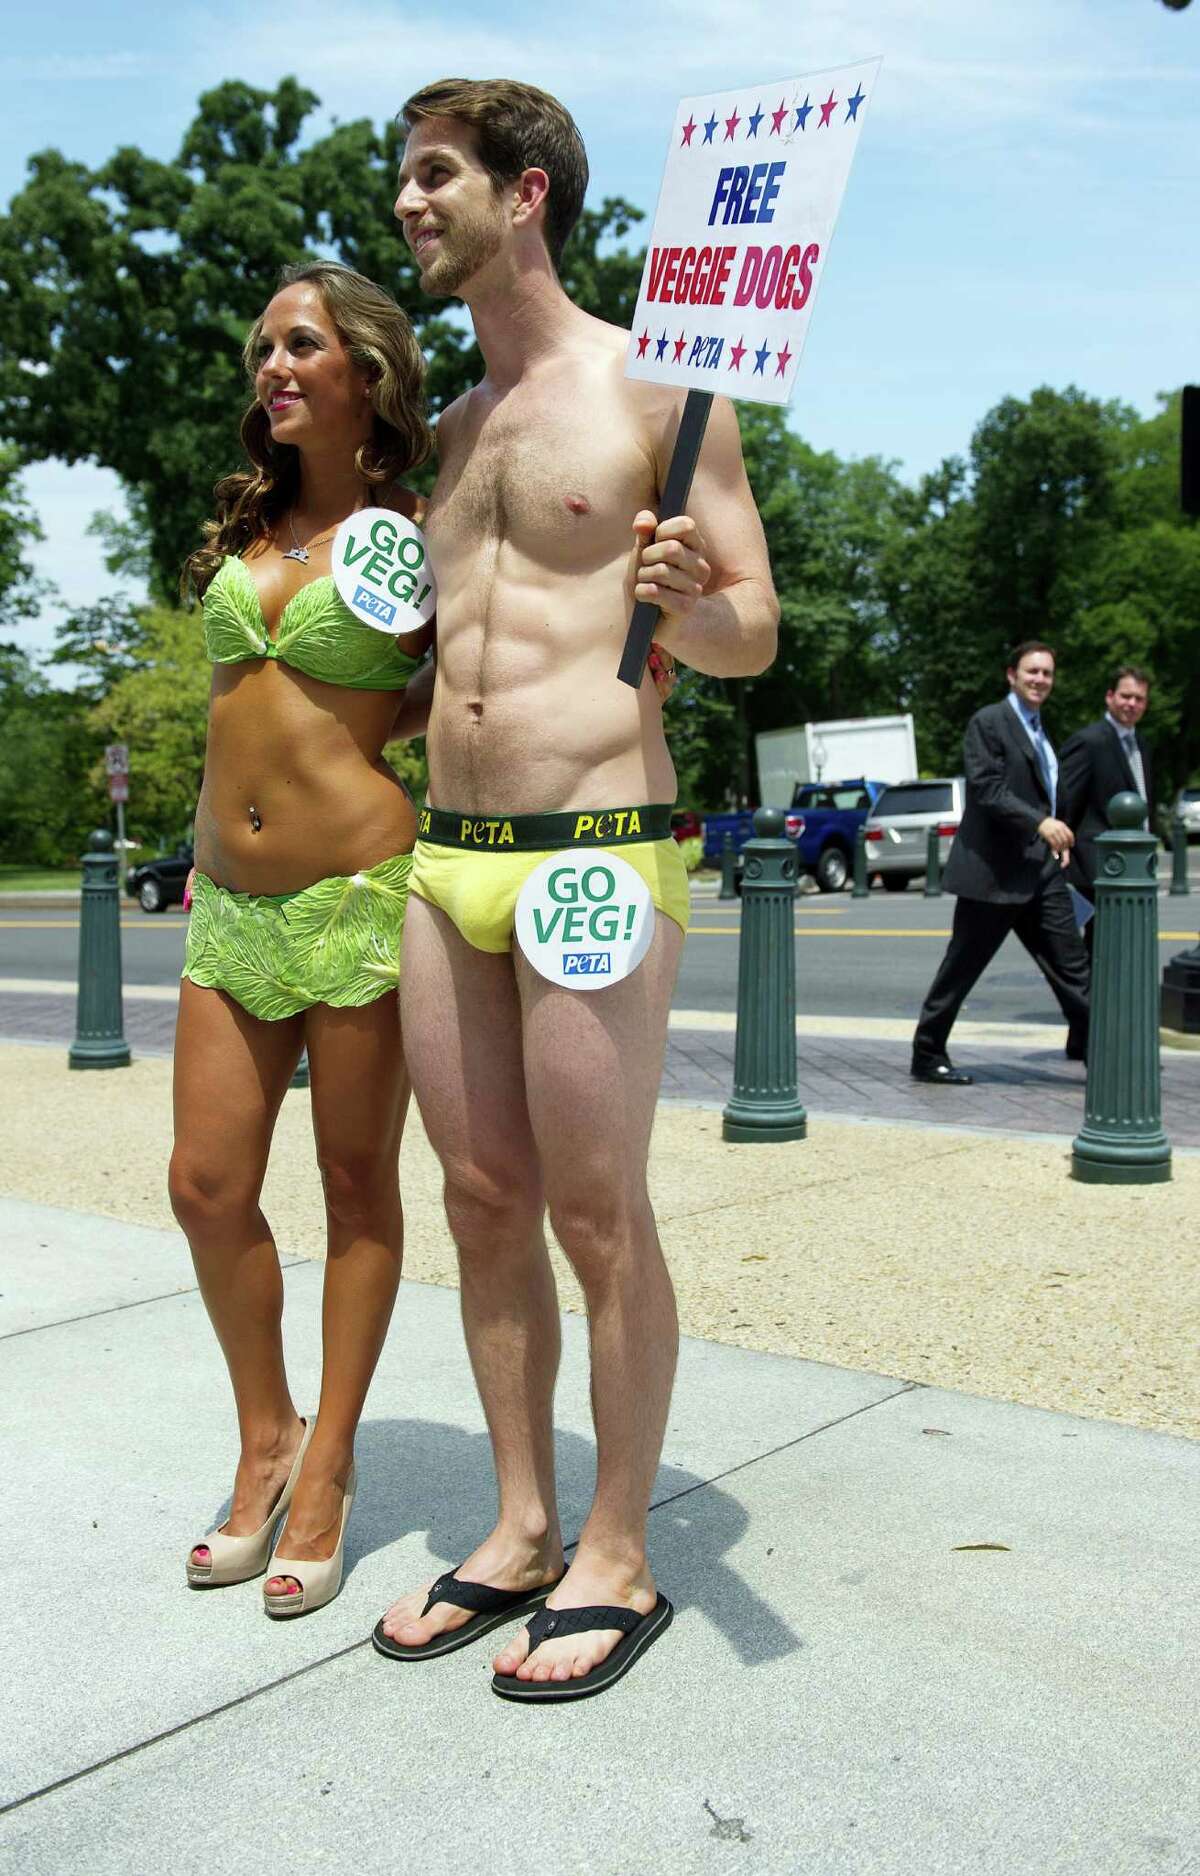 PETA's "Banana Boy" stands with one of the "Sexy Lettuce Ladies", wearing bikinis made of strategically placed lettuce leaves, as they give away vegan hotdogs for members of Congress and their staff on Capitol Hill in Washington, DC, July 11, 2012. AFP PHOTO/Jim WatsonJIM WATSON/AFP/GettyImages